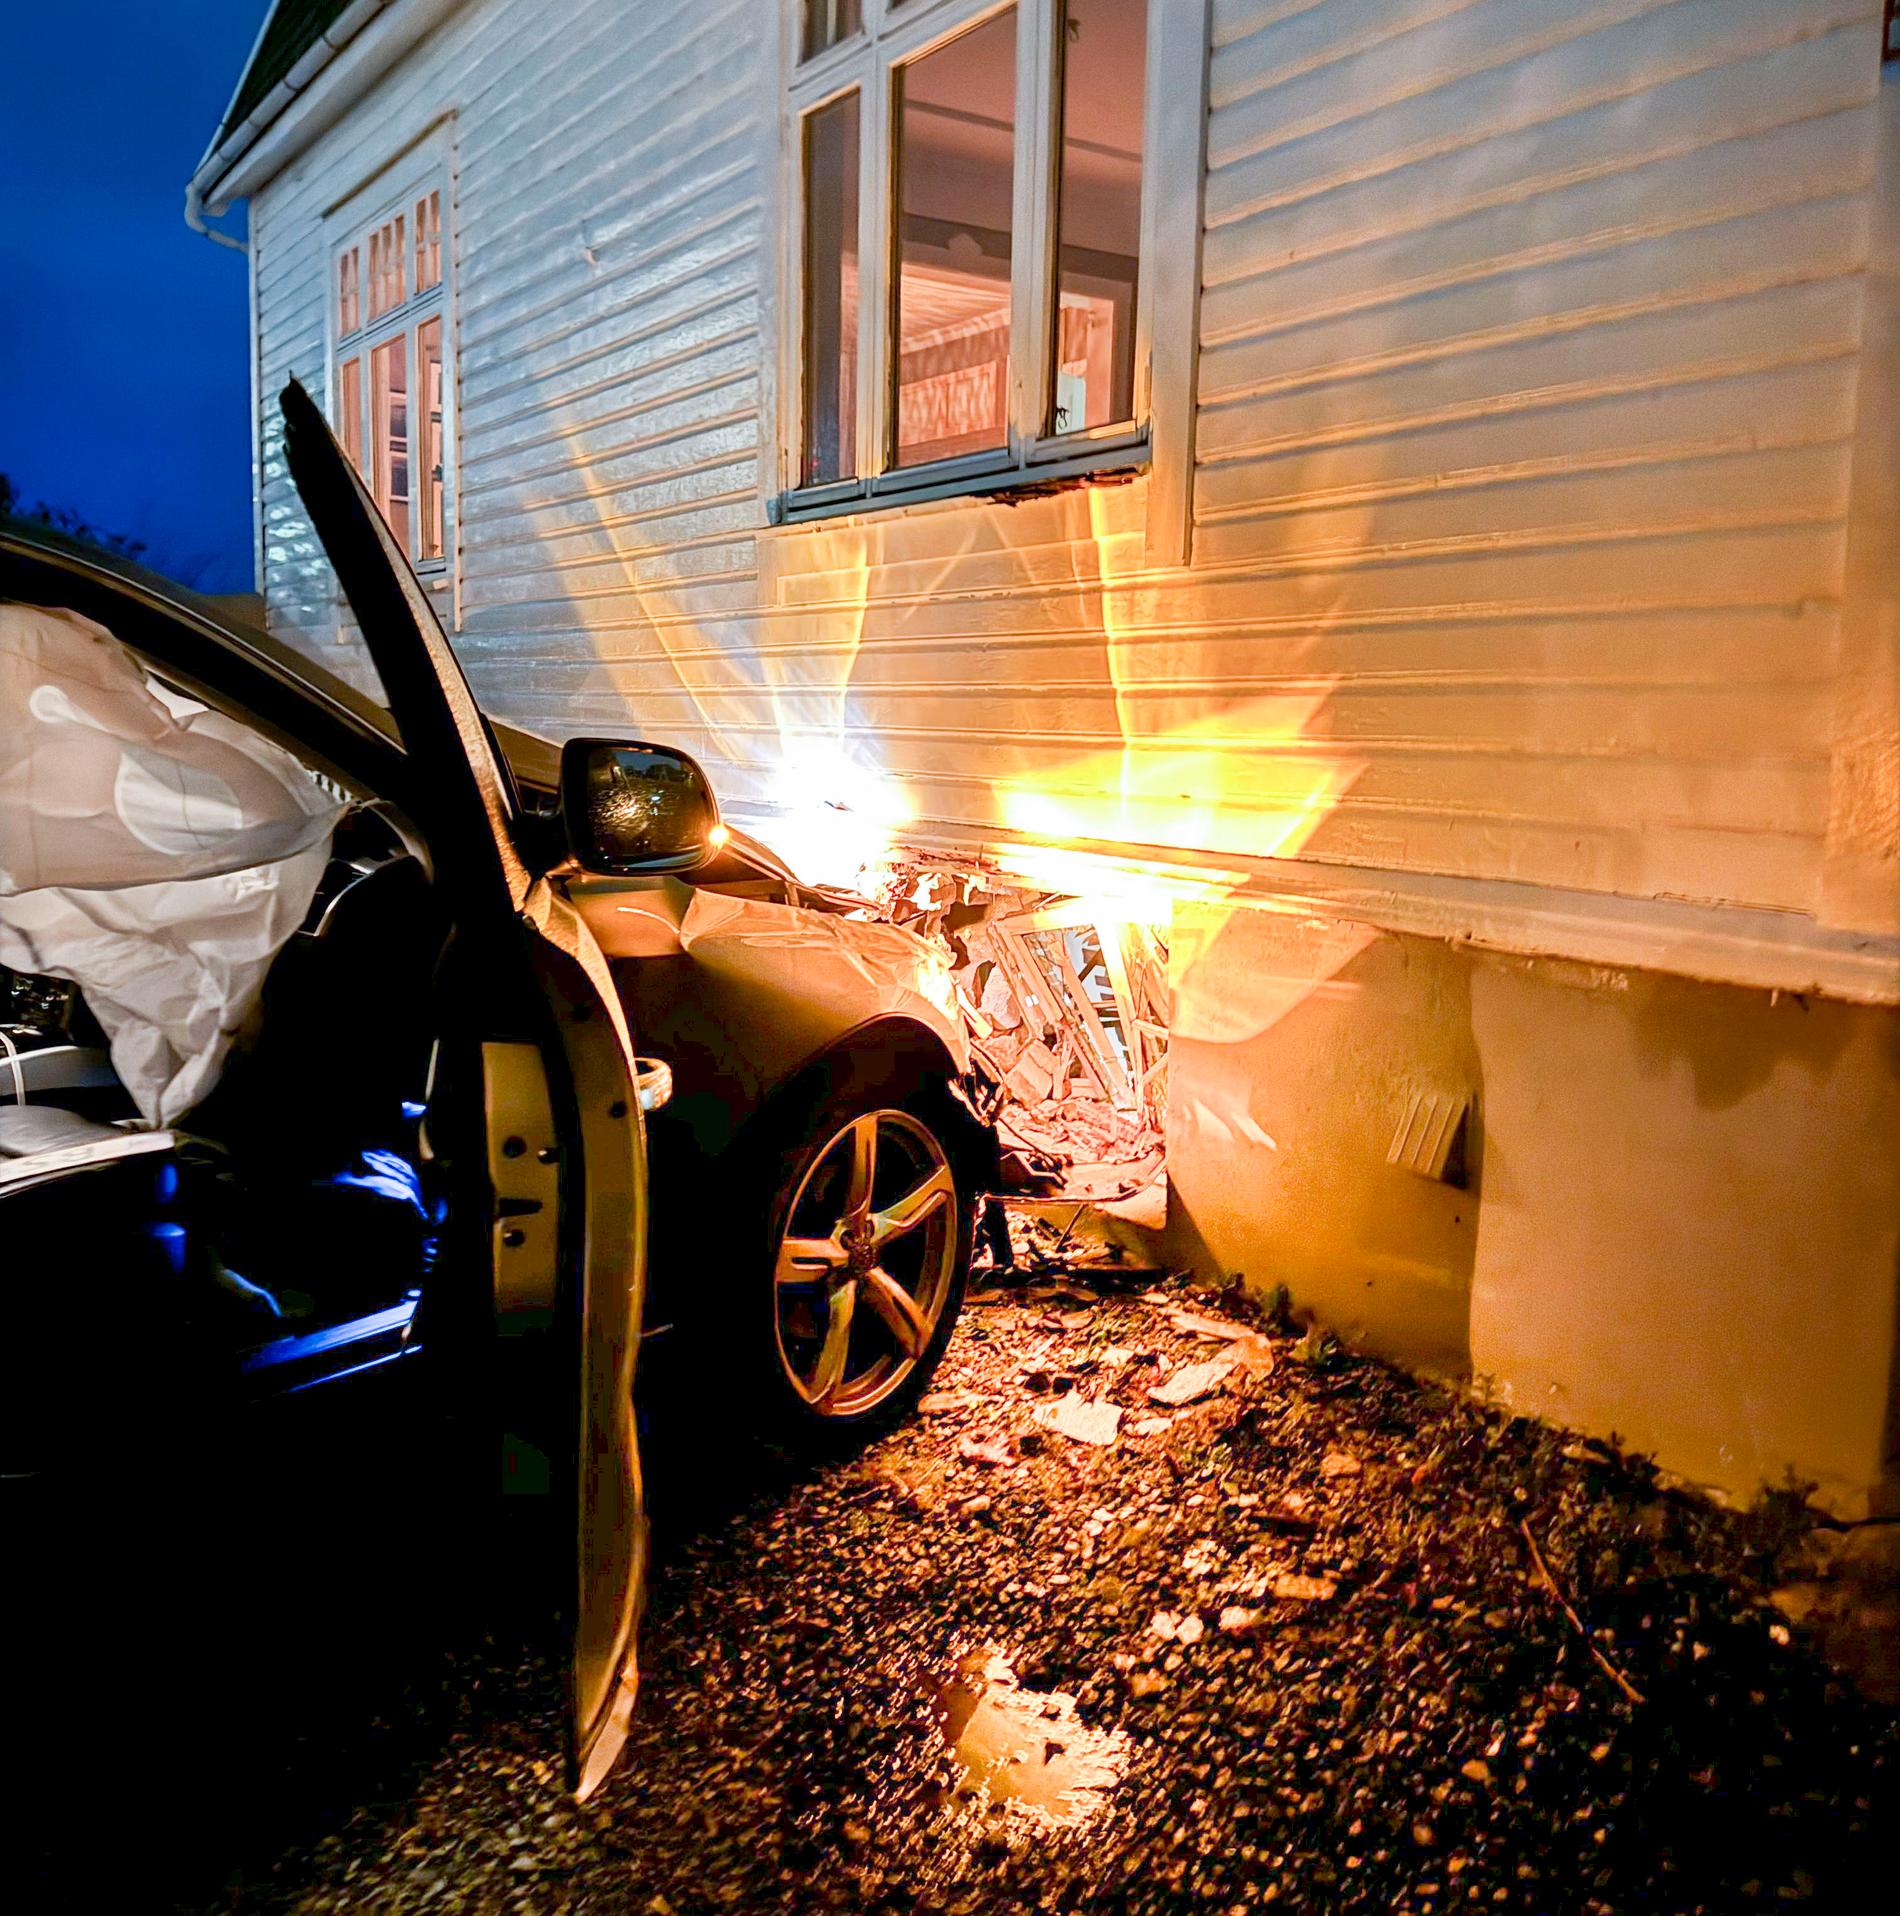 This is where the harsh driving ended: – I woke up to the sound of an explosion